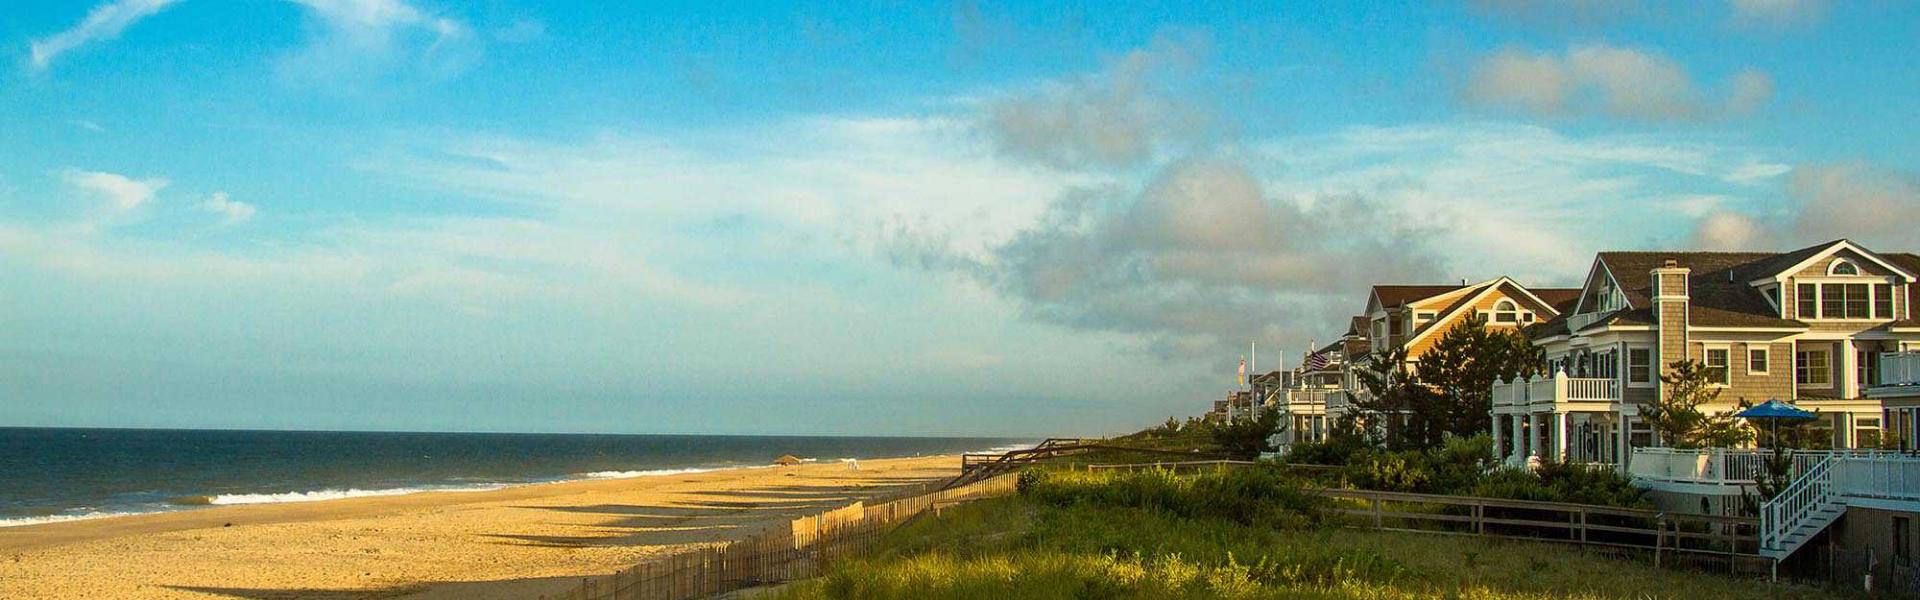 Top 15 Things to Do in Hampton Beach, New Hampshire - Tripping.com - TRIPPING